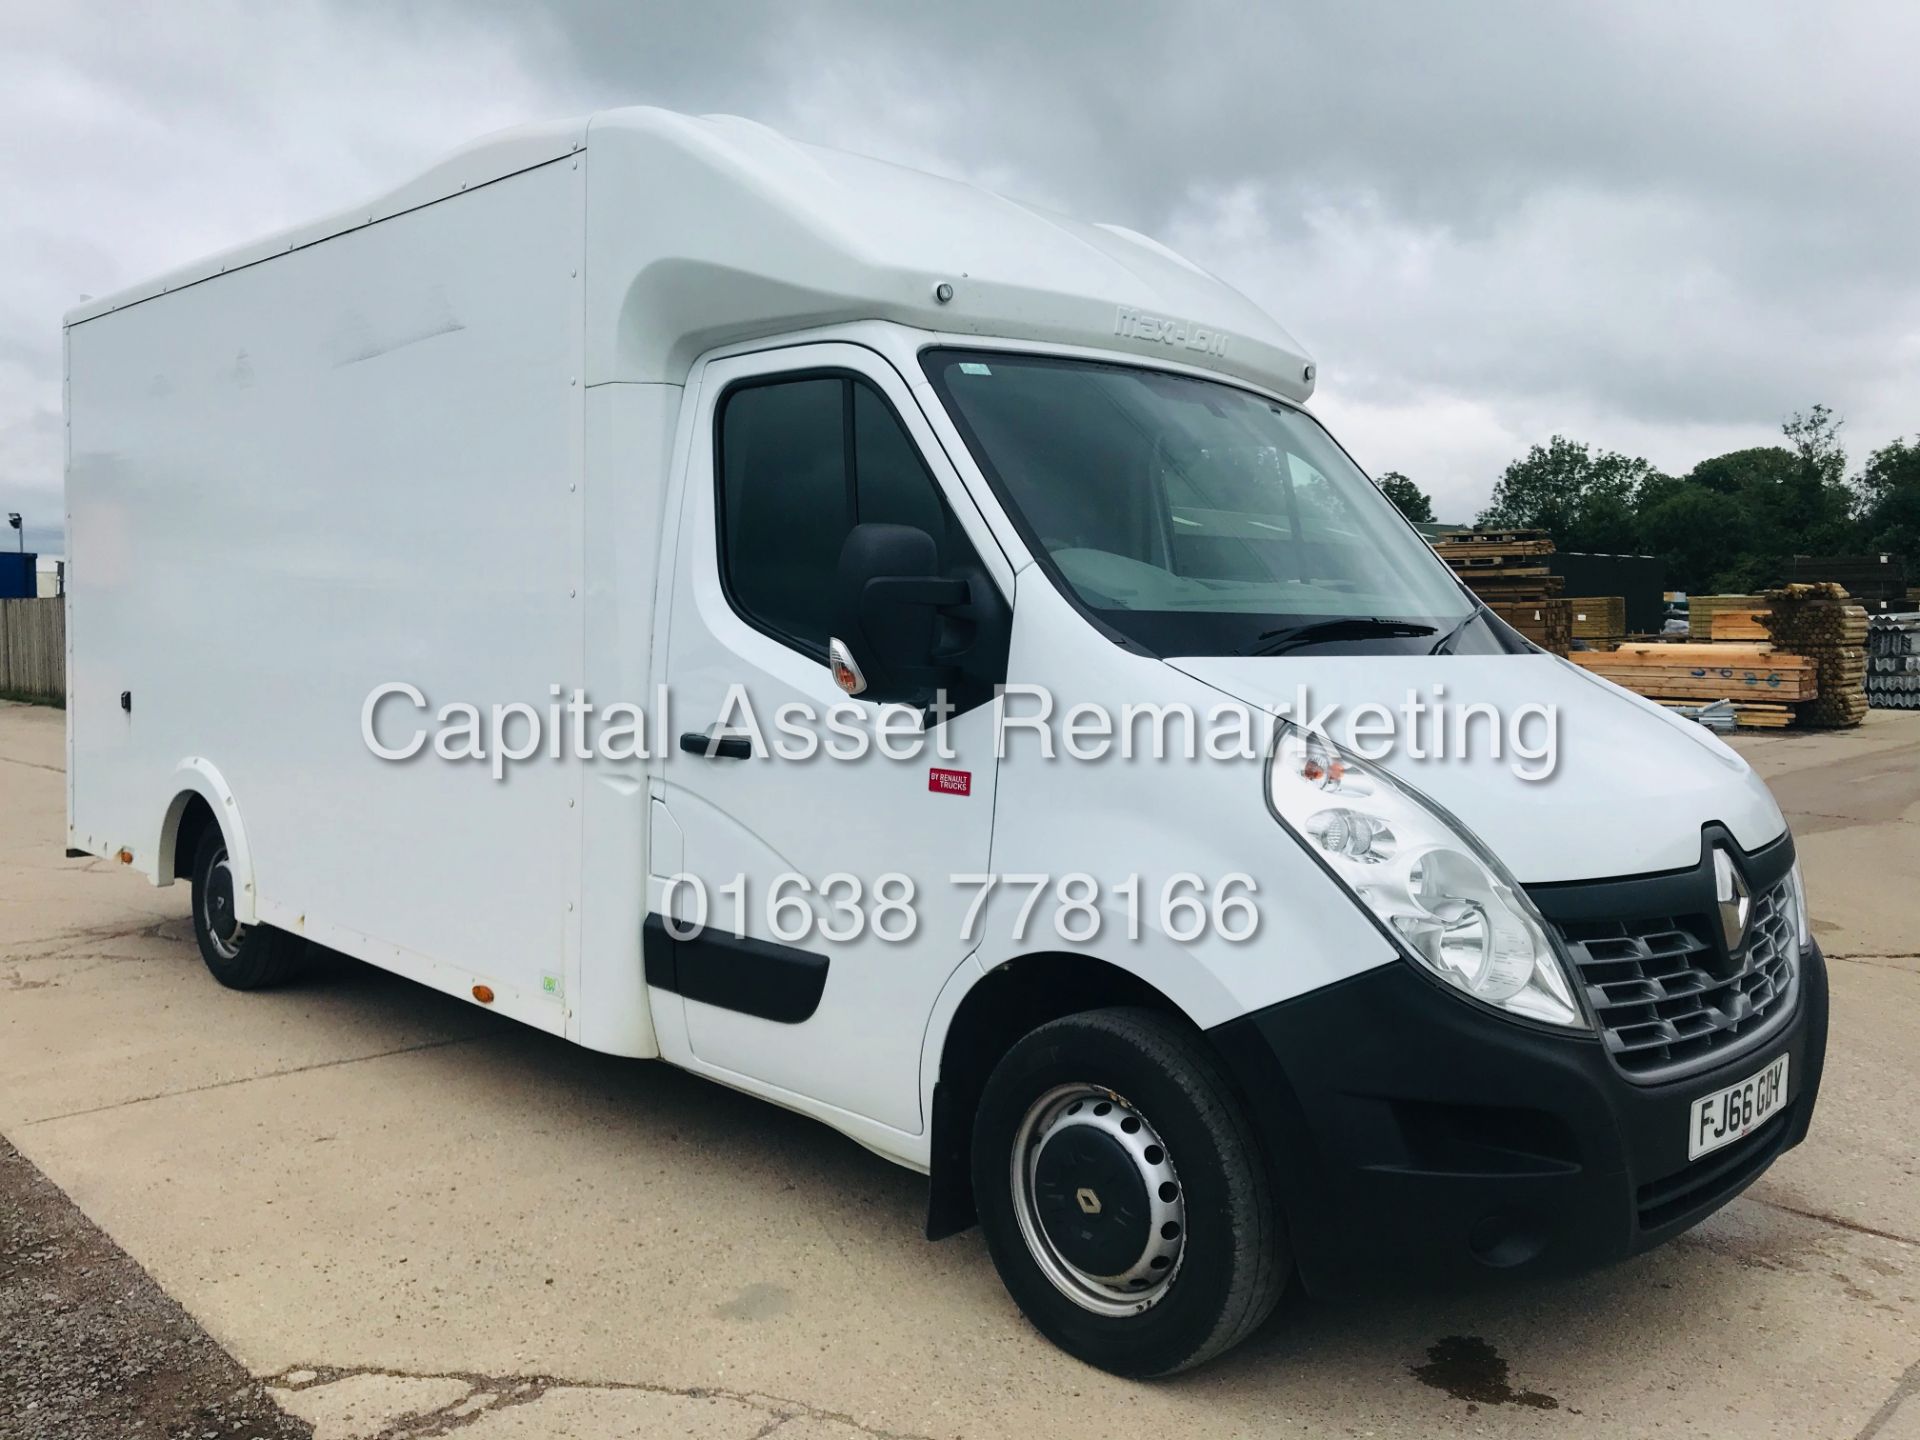 On Sale RENAULT MASTER 2.3DTI "LWB" MAXI-LOW LUTON (2017 REG) EURO 6 -1 OWNER BARN DOORS - AIR CON - Image 3 of 22